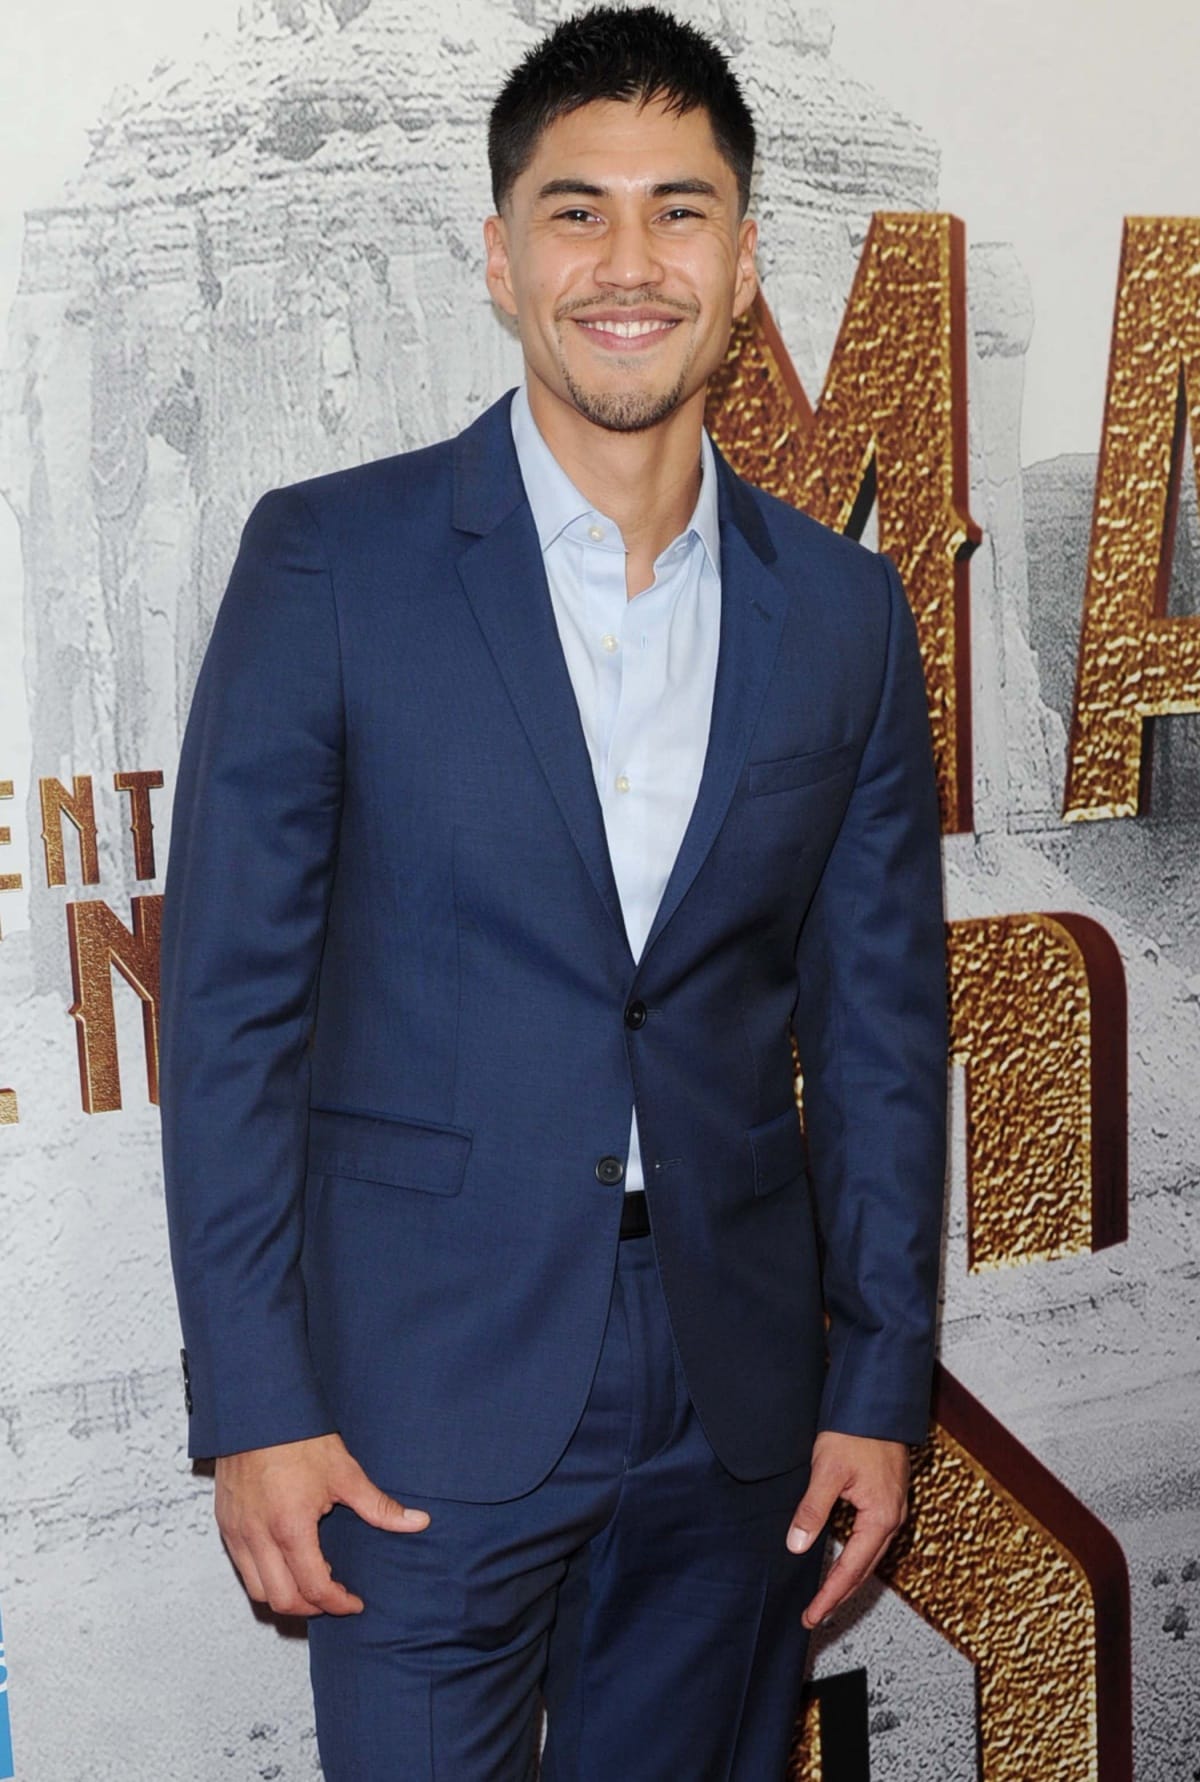 Martin Sensmeier at a special screening of “The Magnificent Seven”